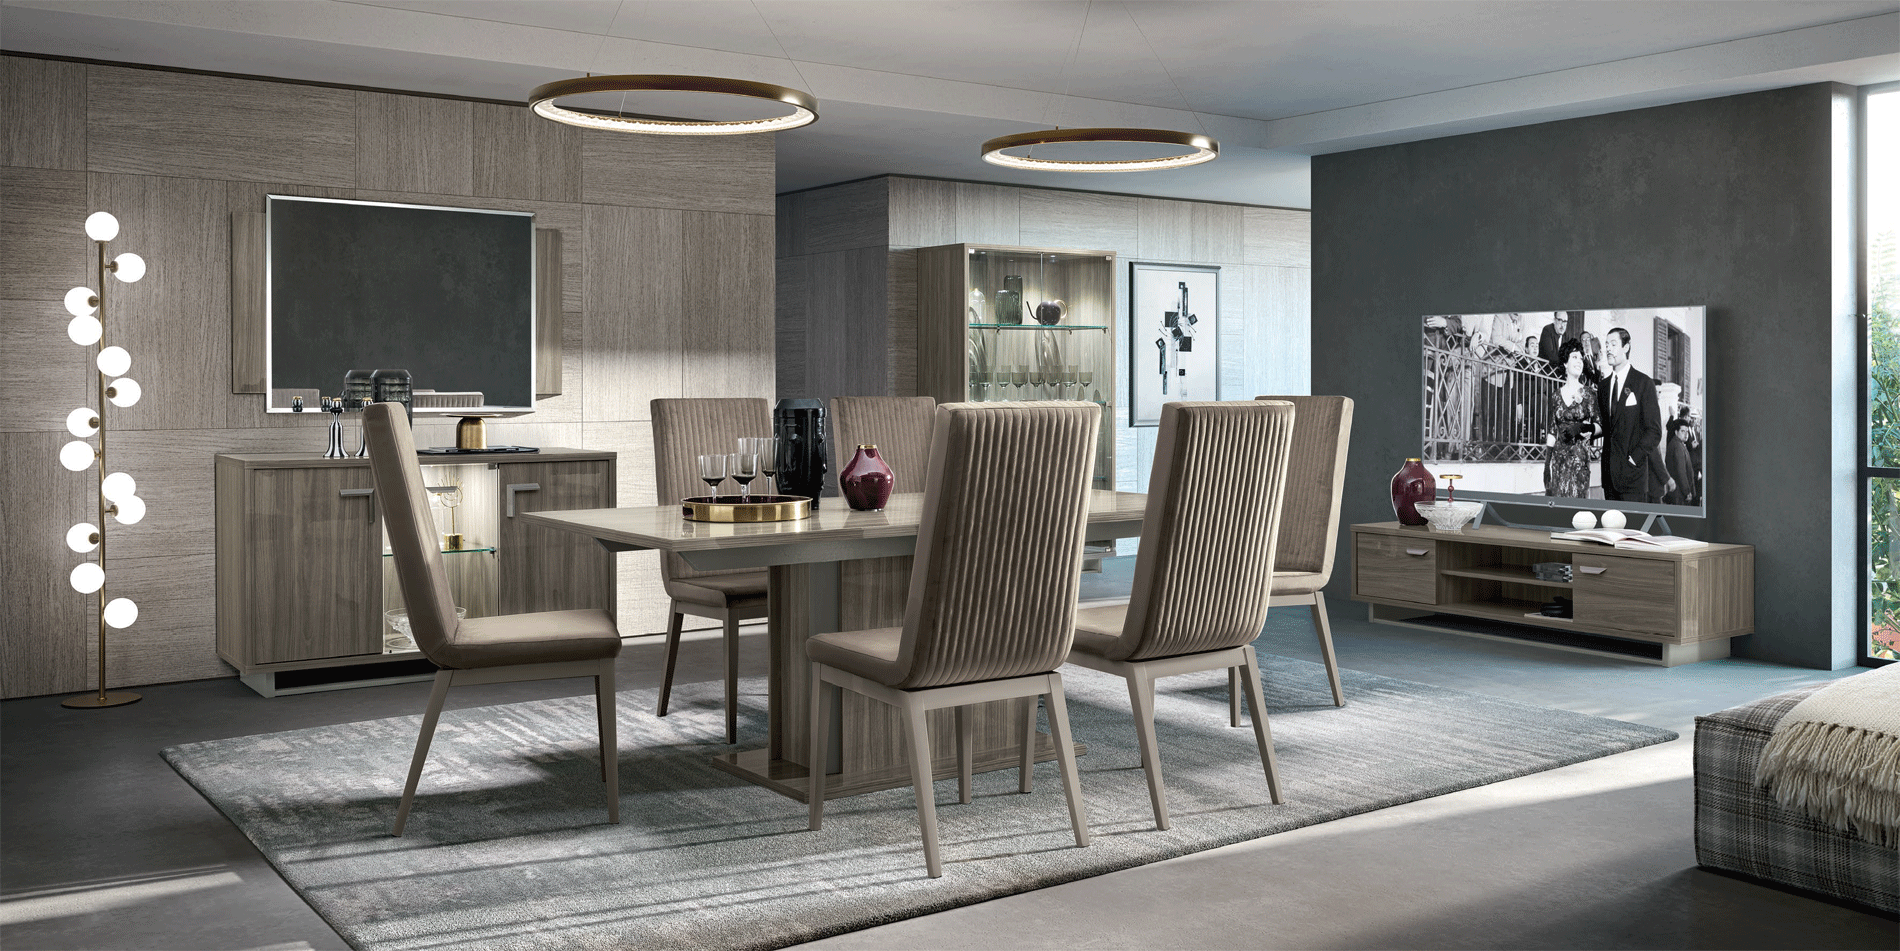 Brands Garcia Sabate REPLAY Volare Dining room GREY Additional Items